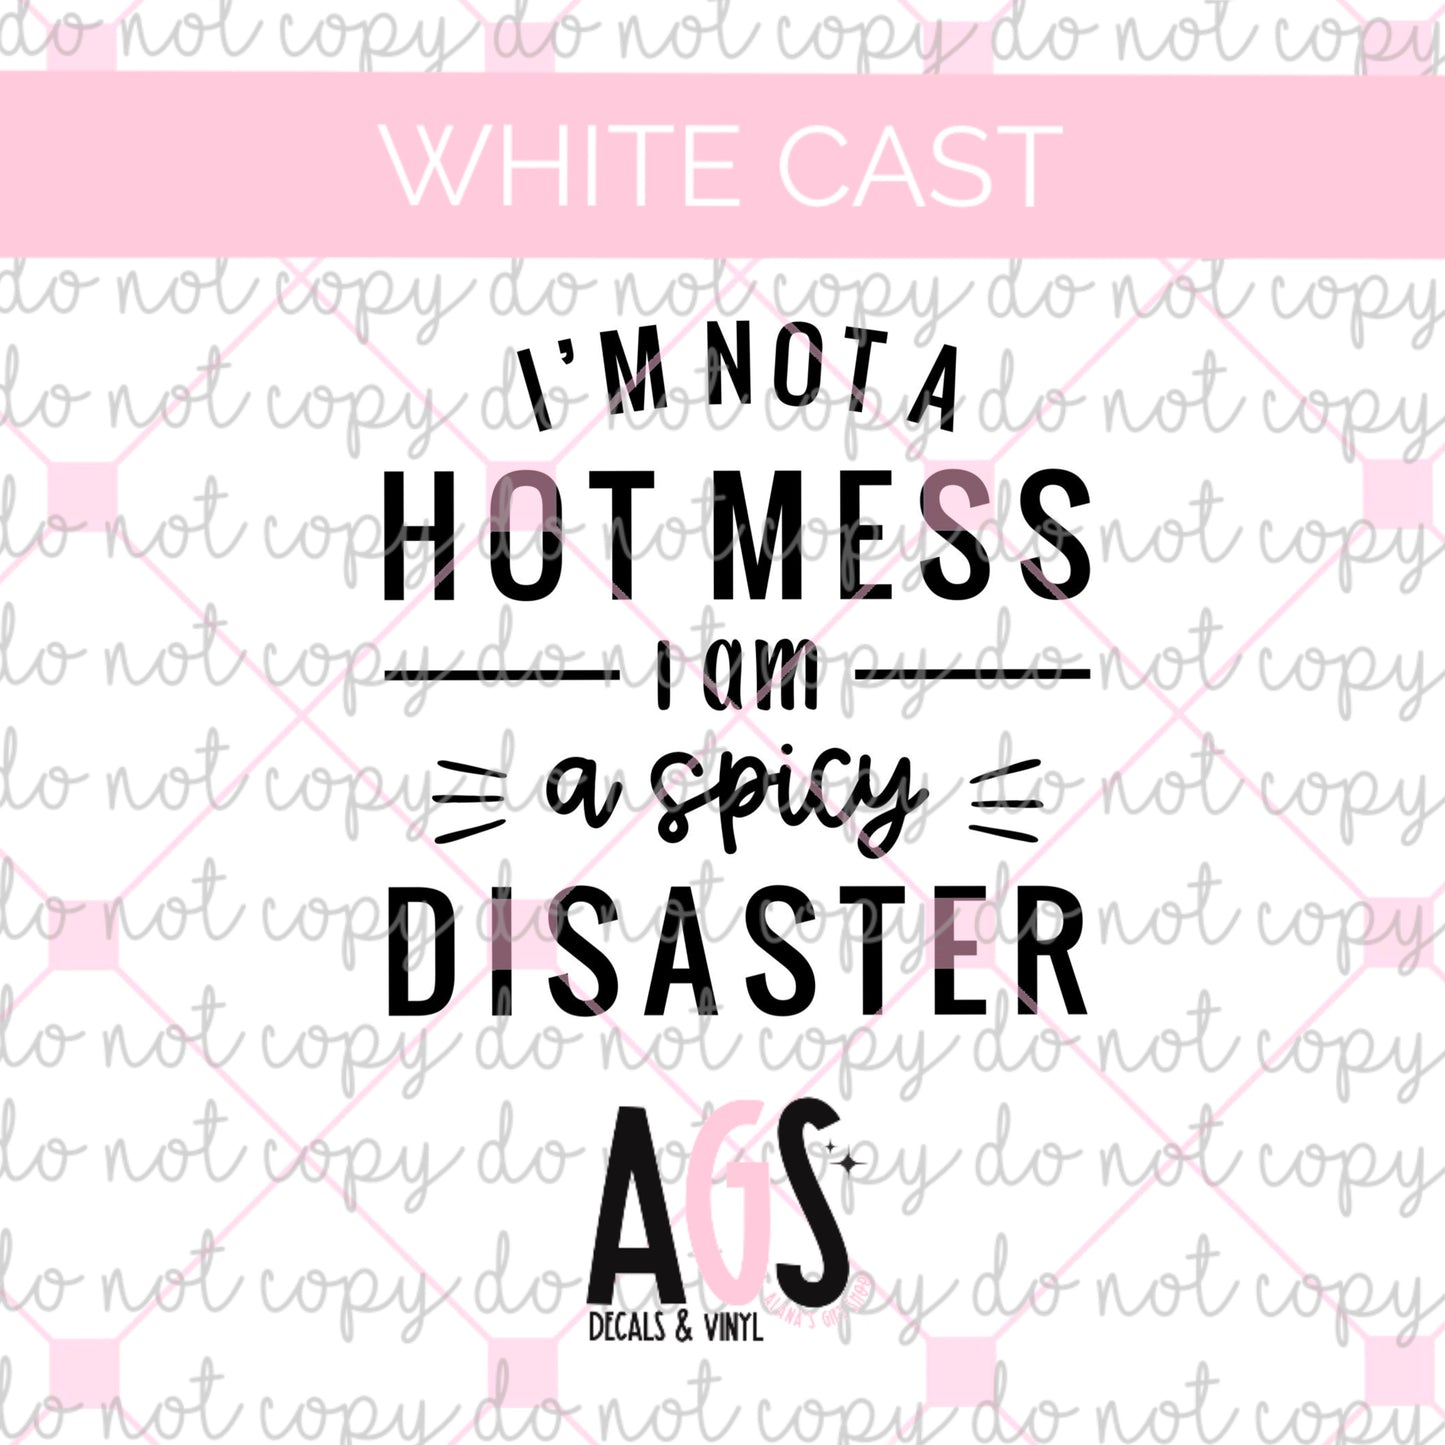 WC-520 I'm Not A Hot Mess I Am A Spicy Disaster